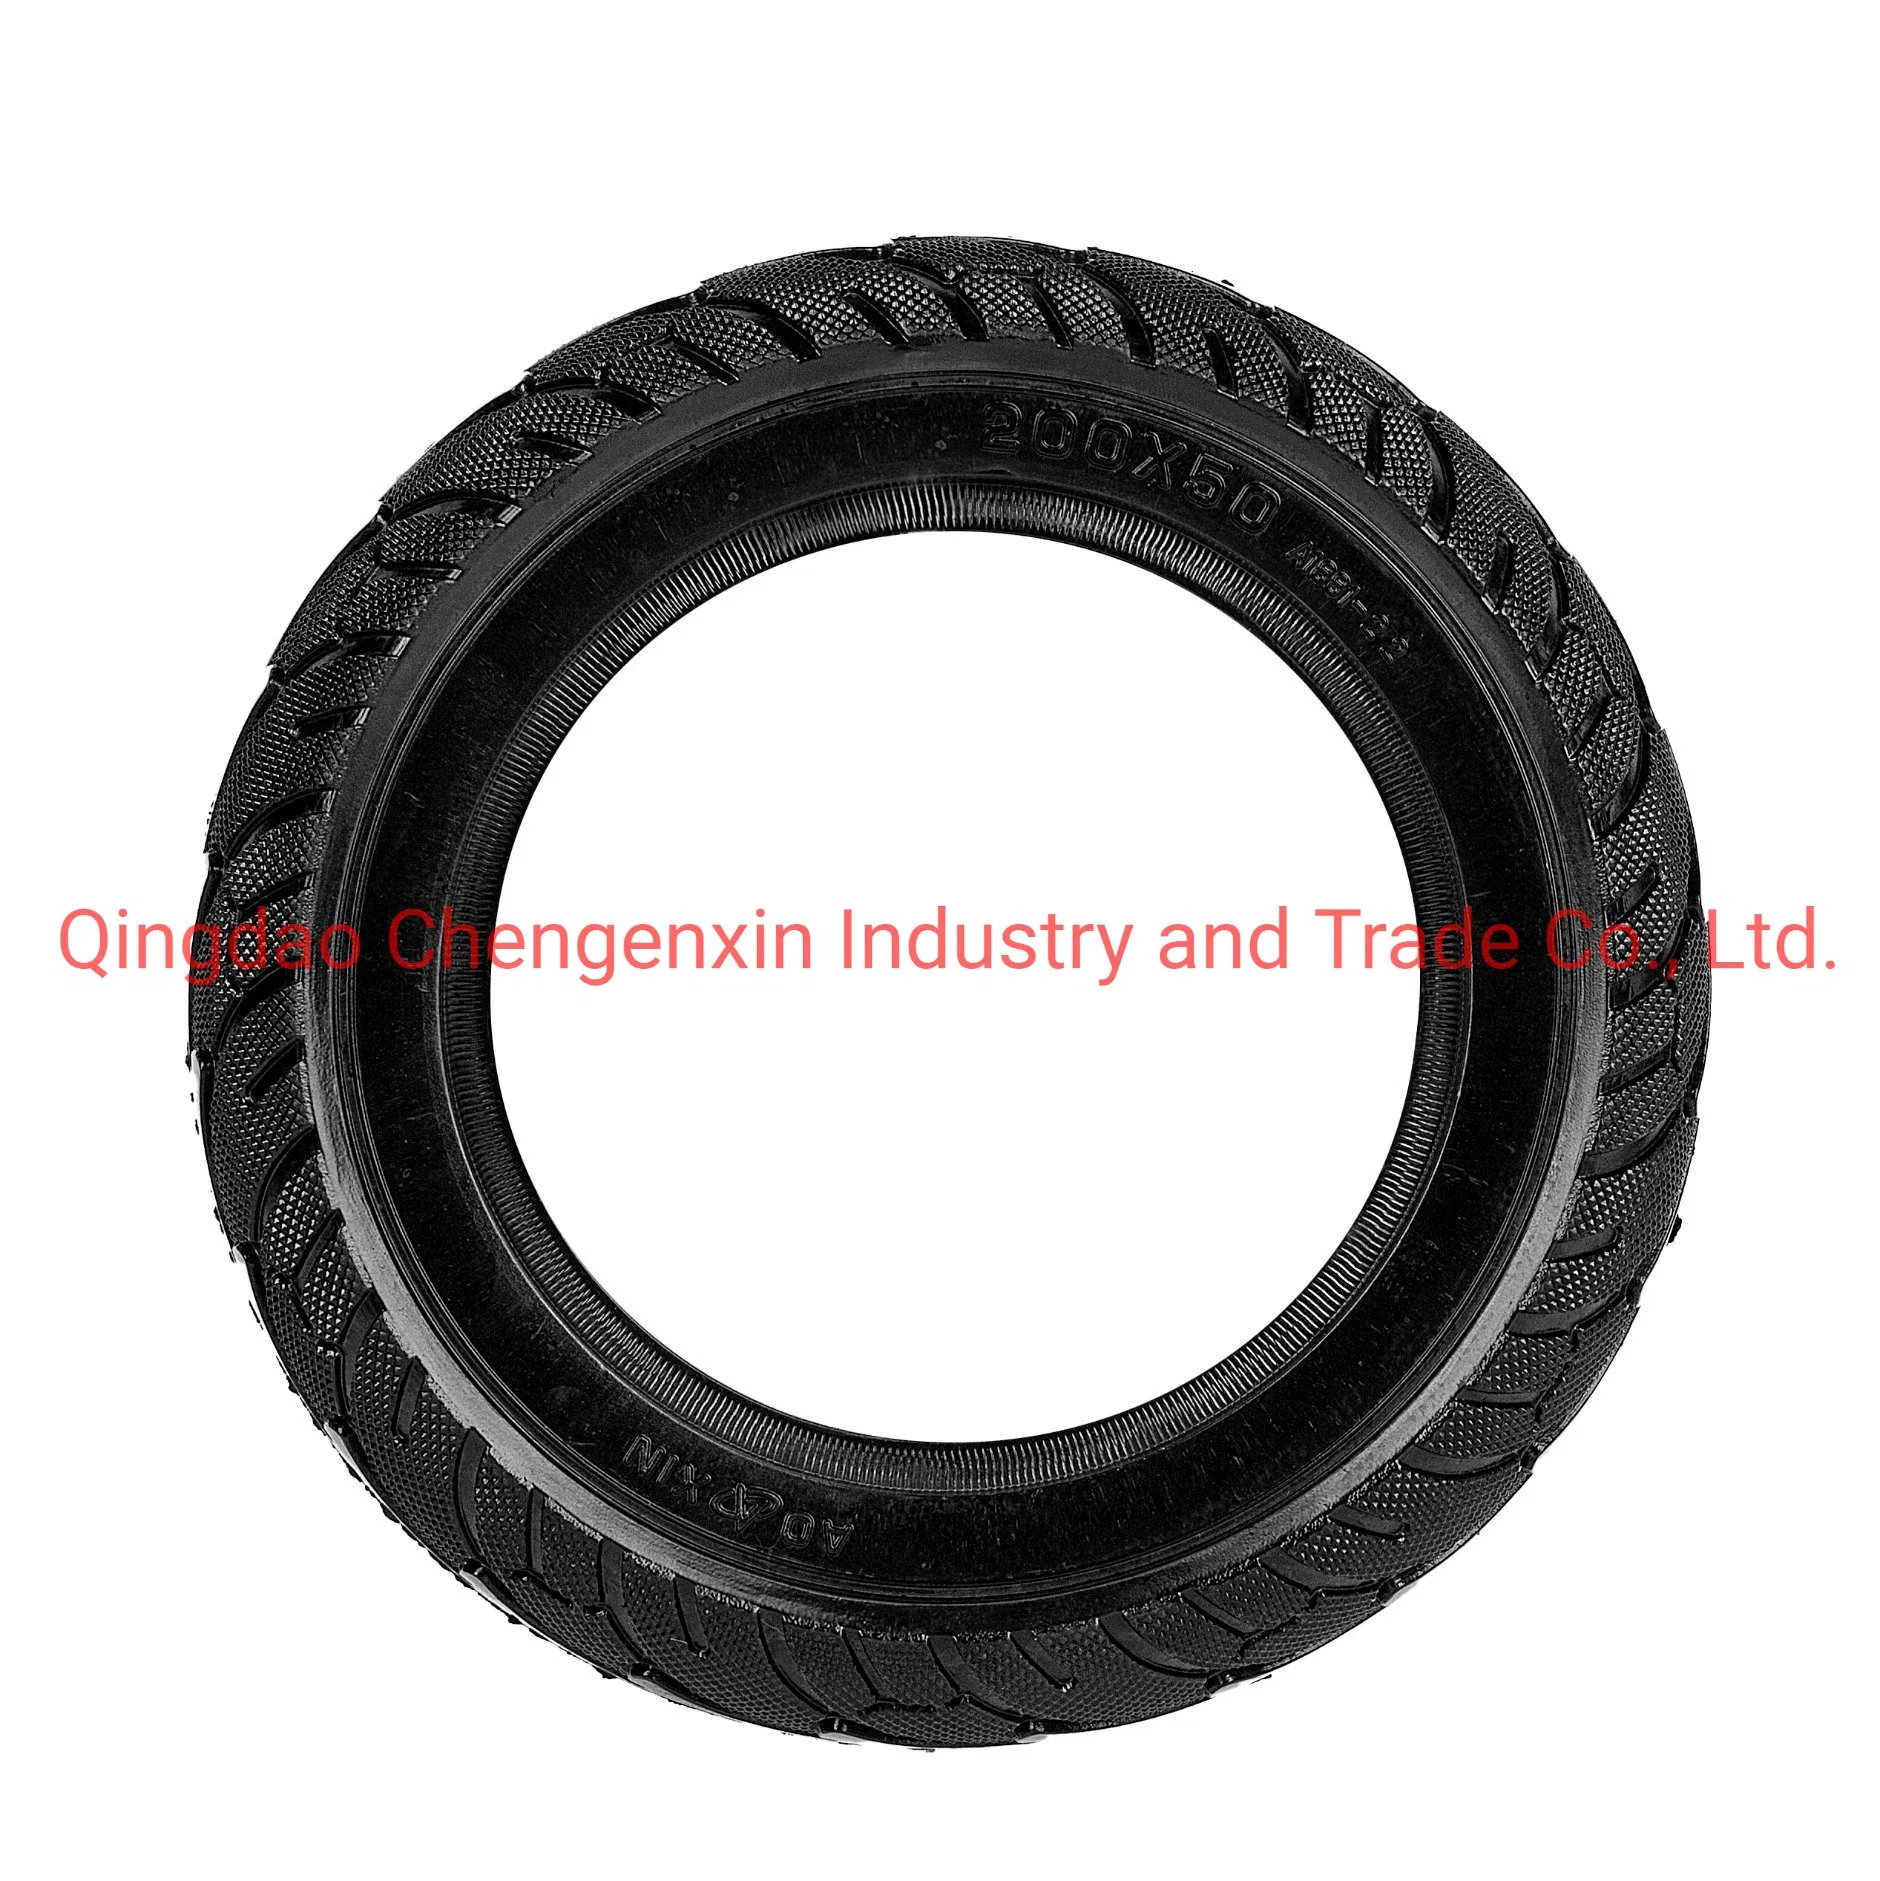 All Kinds of Standard Small Mini Tricycle Tire/Scooter Tire/off-Road Tire/Electric Motorcycle Tire/Ebike Tire/Electric Bicycle Wheel